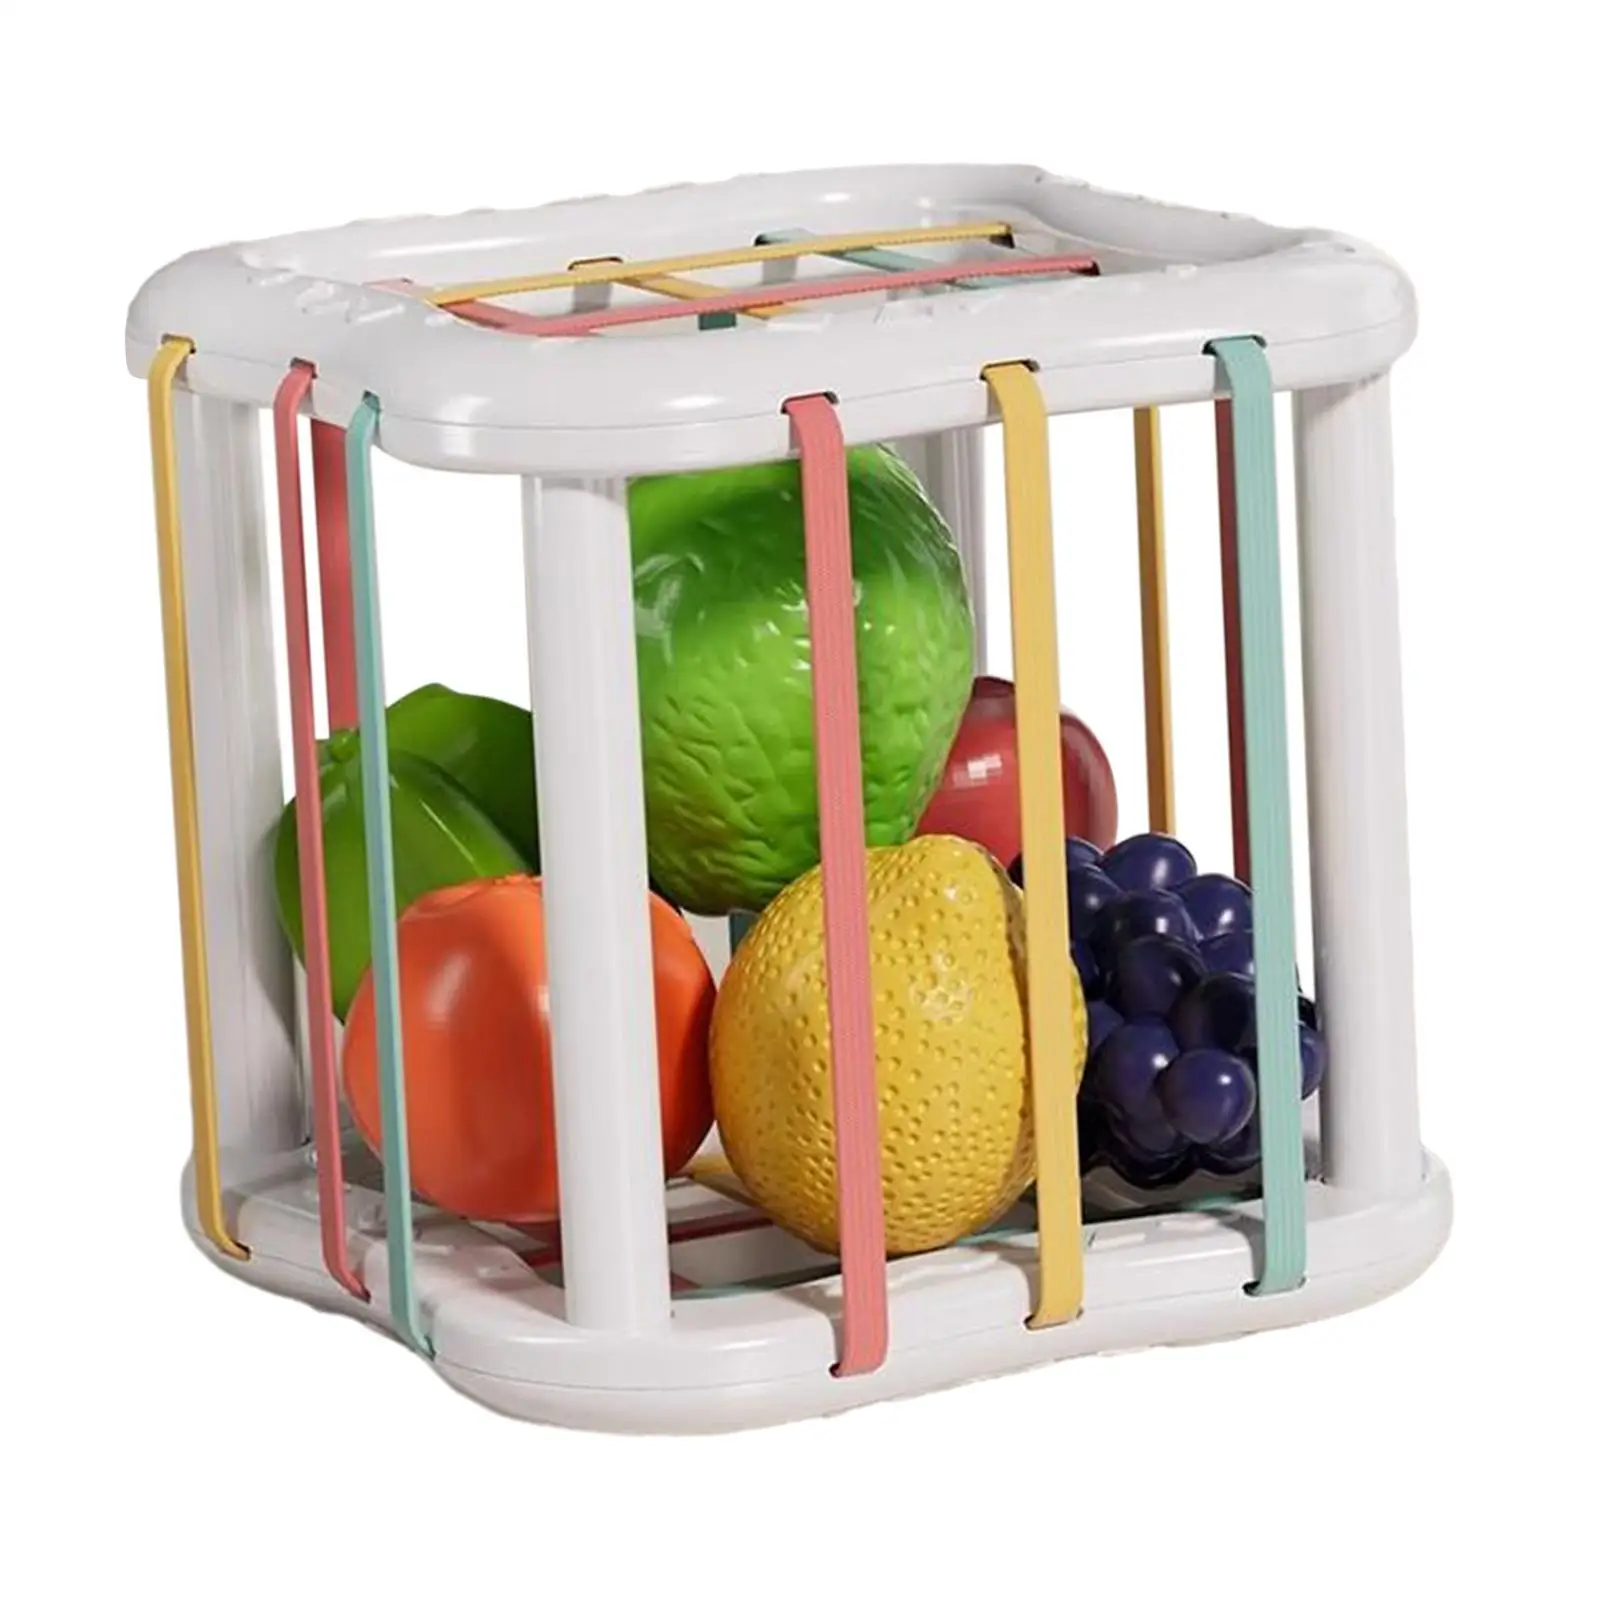 Storage Cube Bins and 6 Fruits Balls Montessori Baby Shape Sorter Toy for Girls Boys Toddlers Age 1 2 3 Children Birthday Gifts